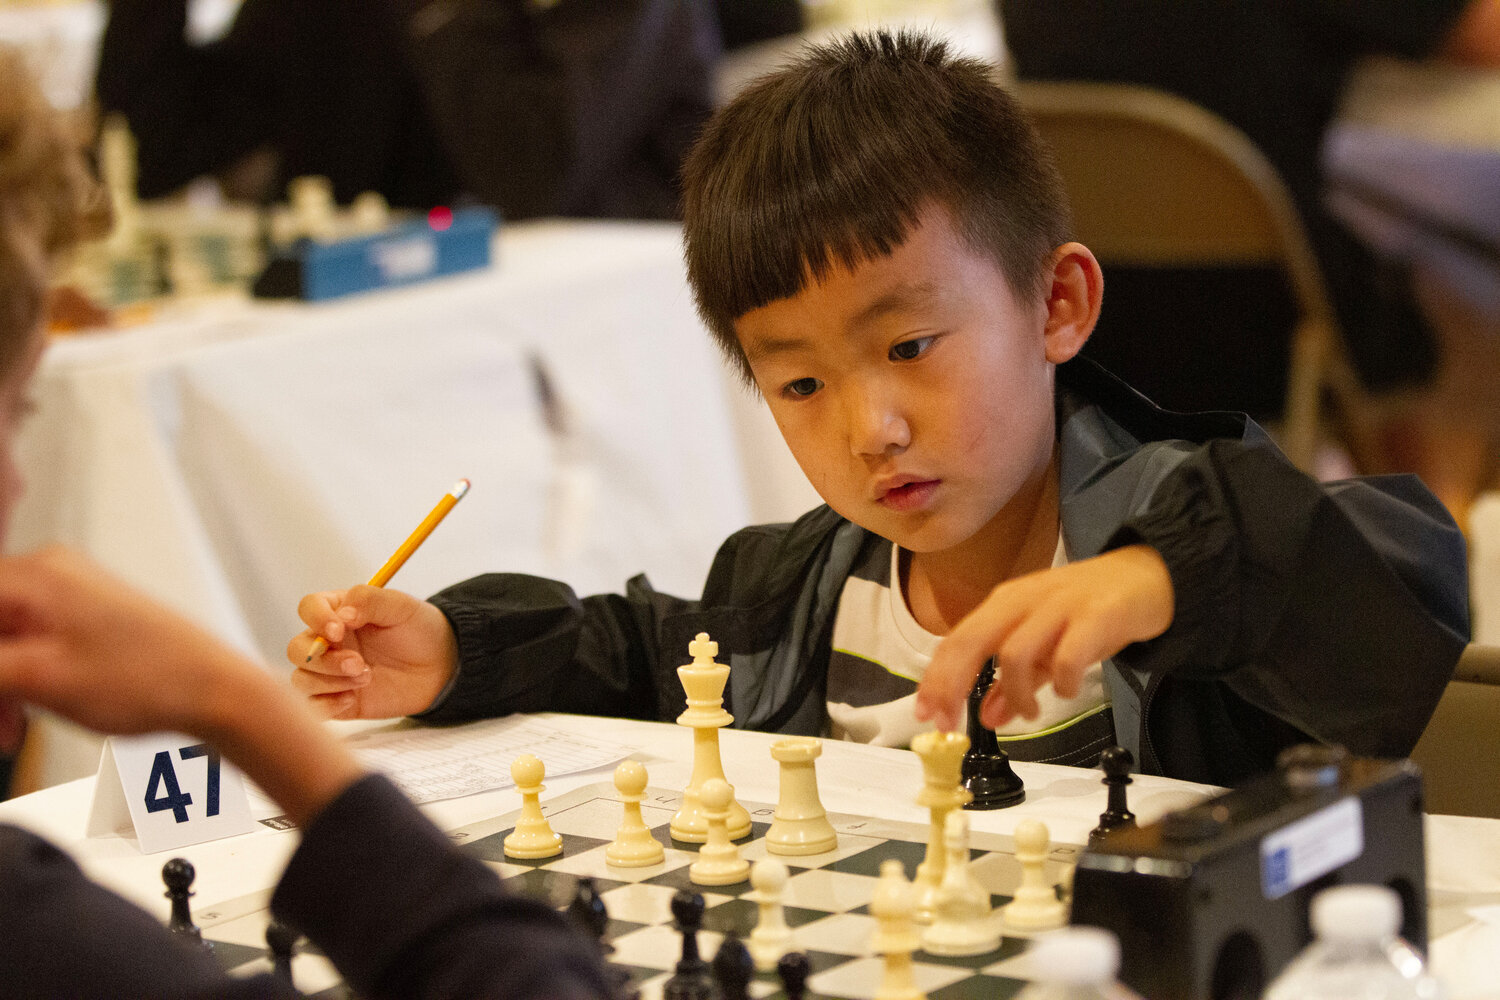 Sycamore Yuan makes a move during his fourth round match.